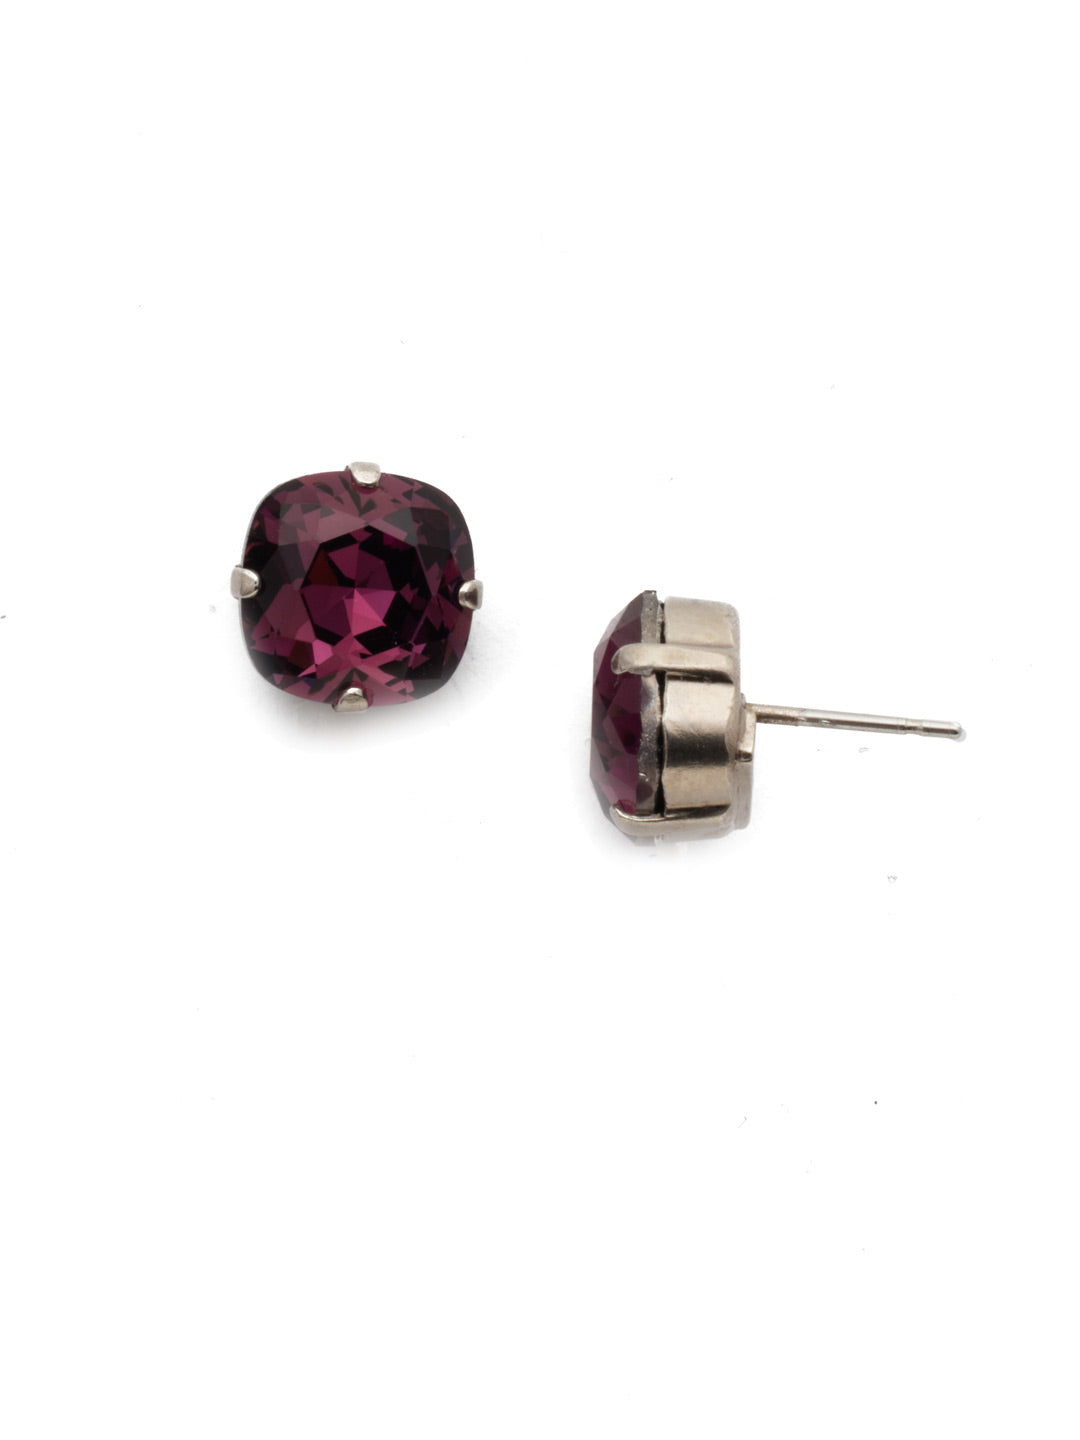 Halcyon Stud Earrings - EDH25ASAM - <p>A beautiful, luminous cushion-cut crystal in a classic four-pronged setting that's ideal for everyday wear. From Sorrelli's Amethyst collection in our Antique Silver-tone finish.</p>